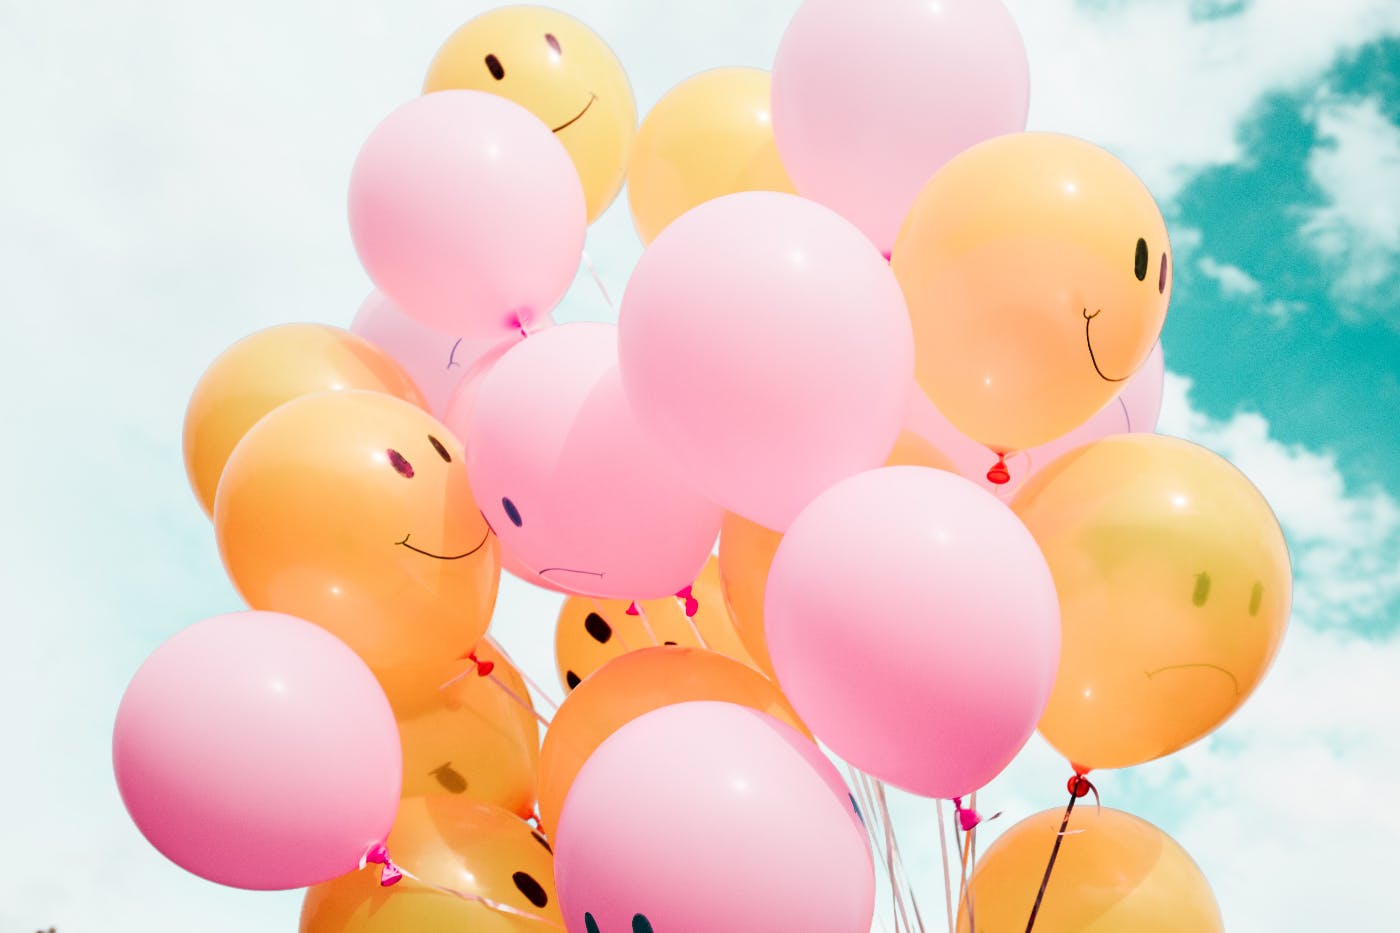 Yellow balloons with smiley faces, pink balloons with frowns